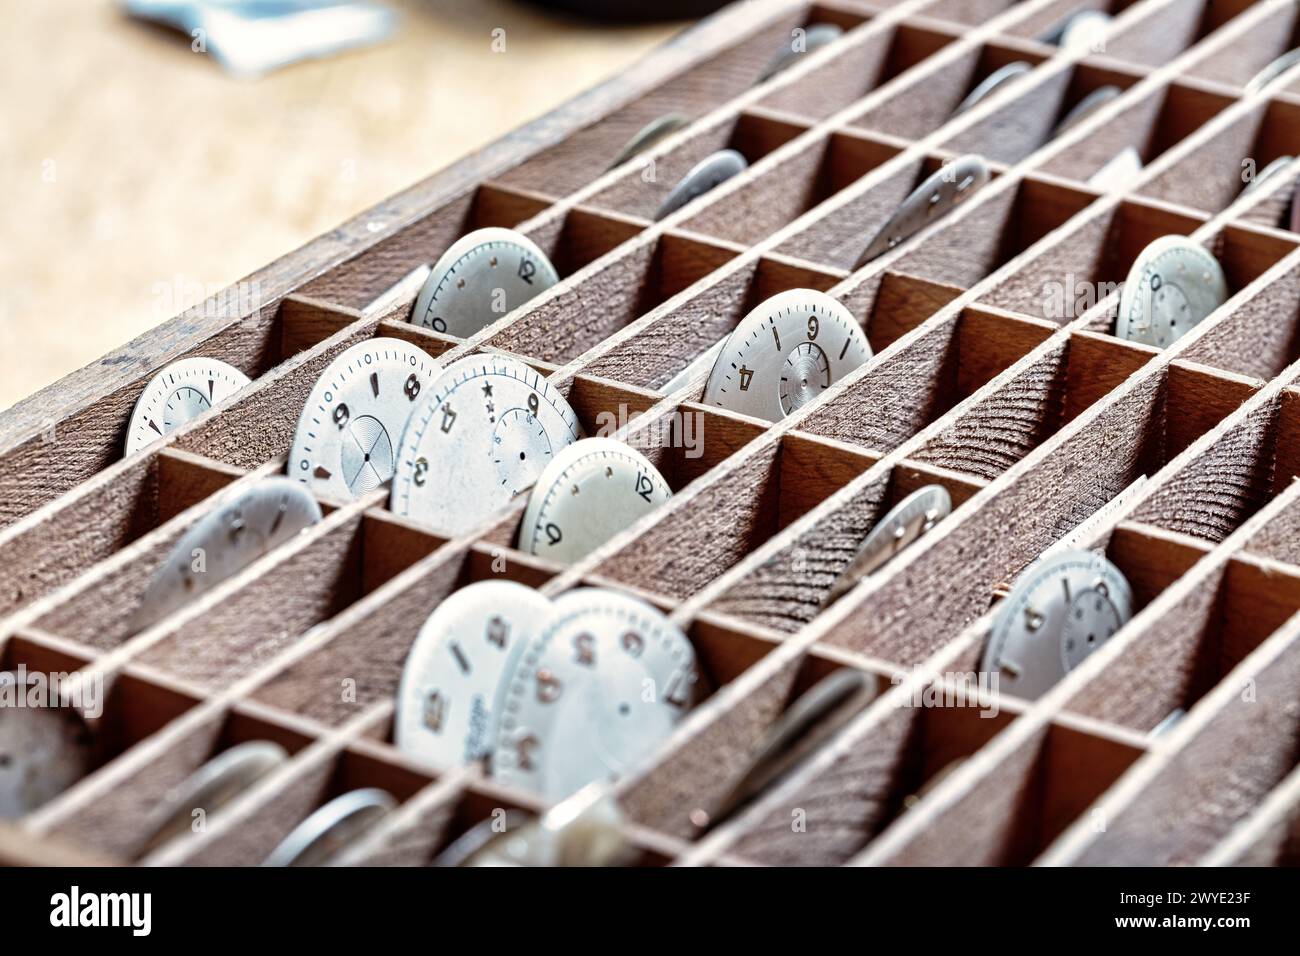 meticulous order of watch dials in compartments, each a frozen moment in the watchmaker's care Stock Photo